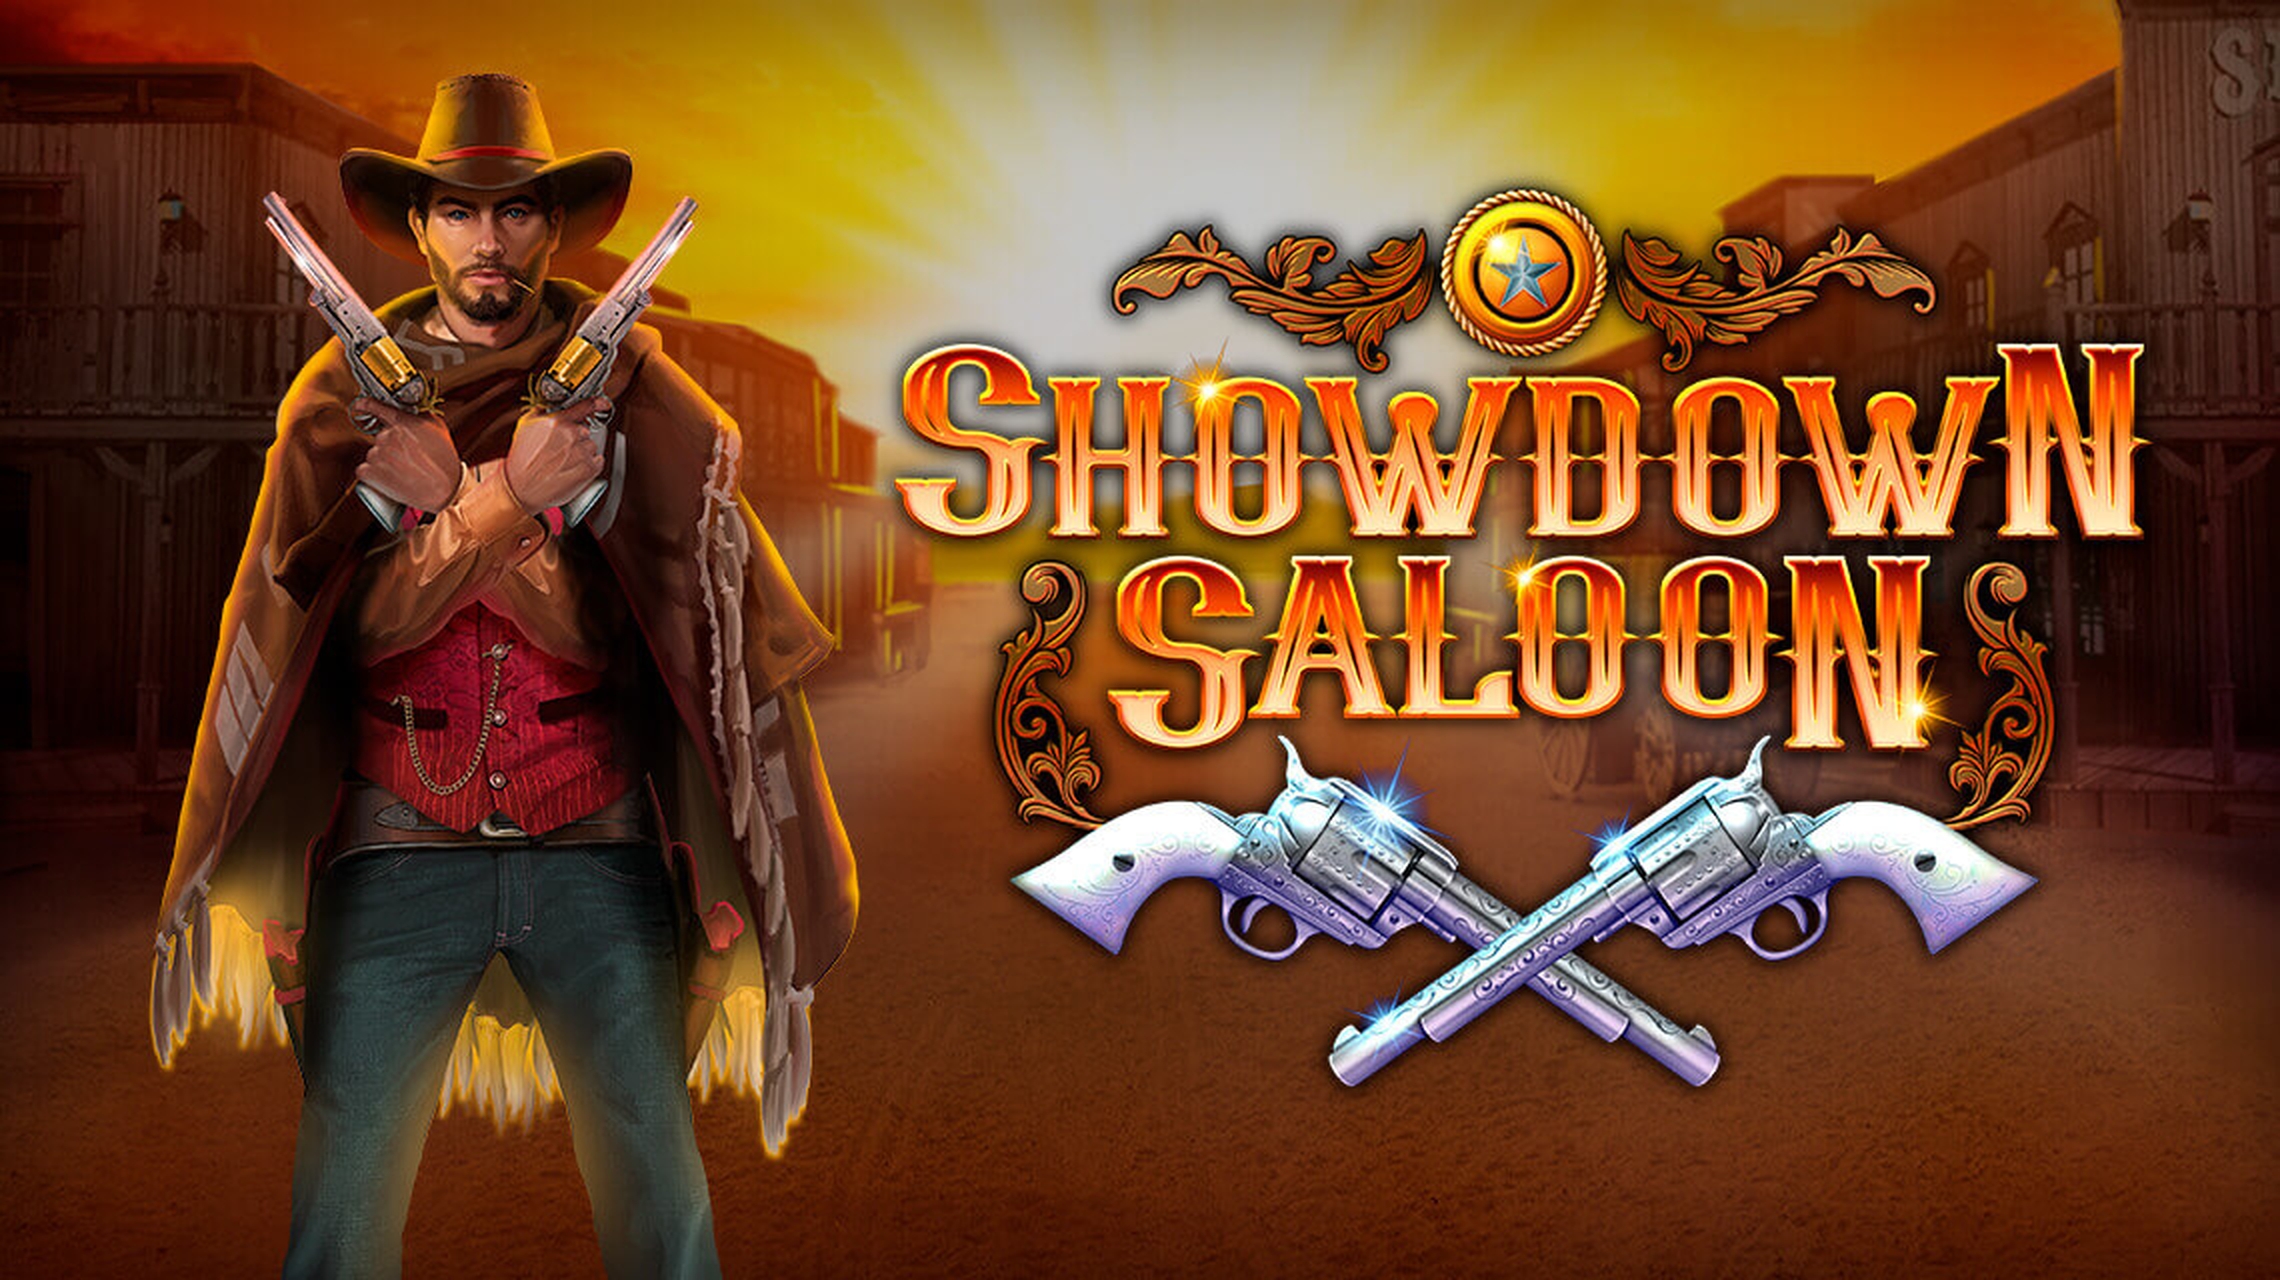 The Showdown Saloon Online Slot Demo Game by Fortune Factory Studios